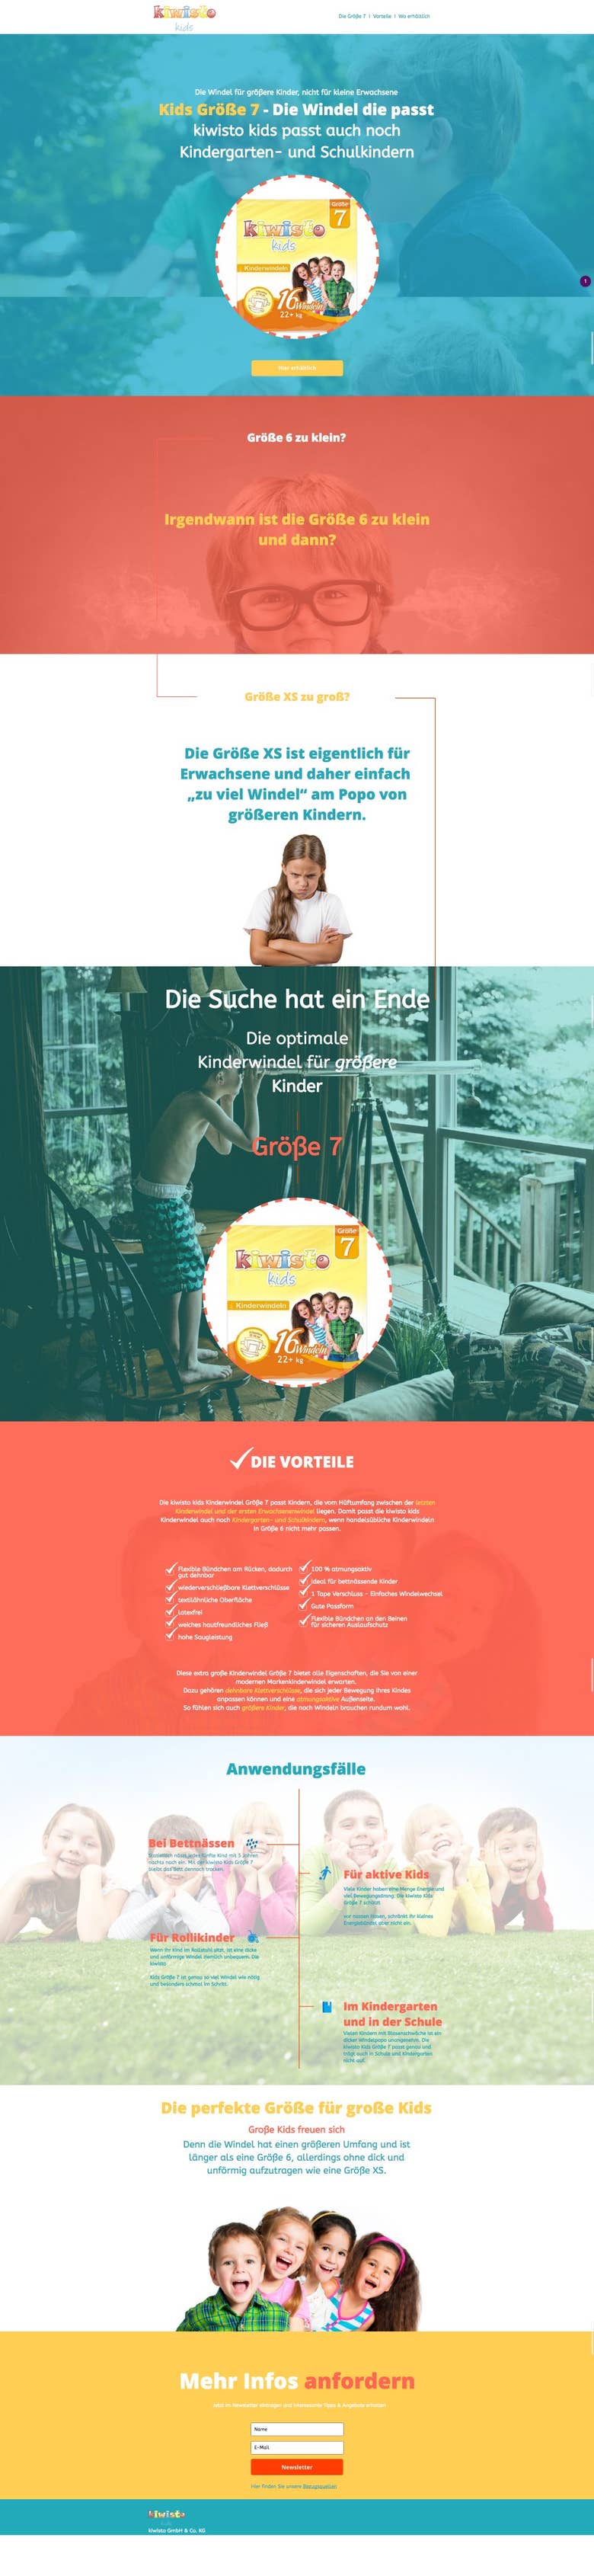 Psd to Html mobile responsive